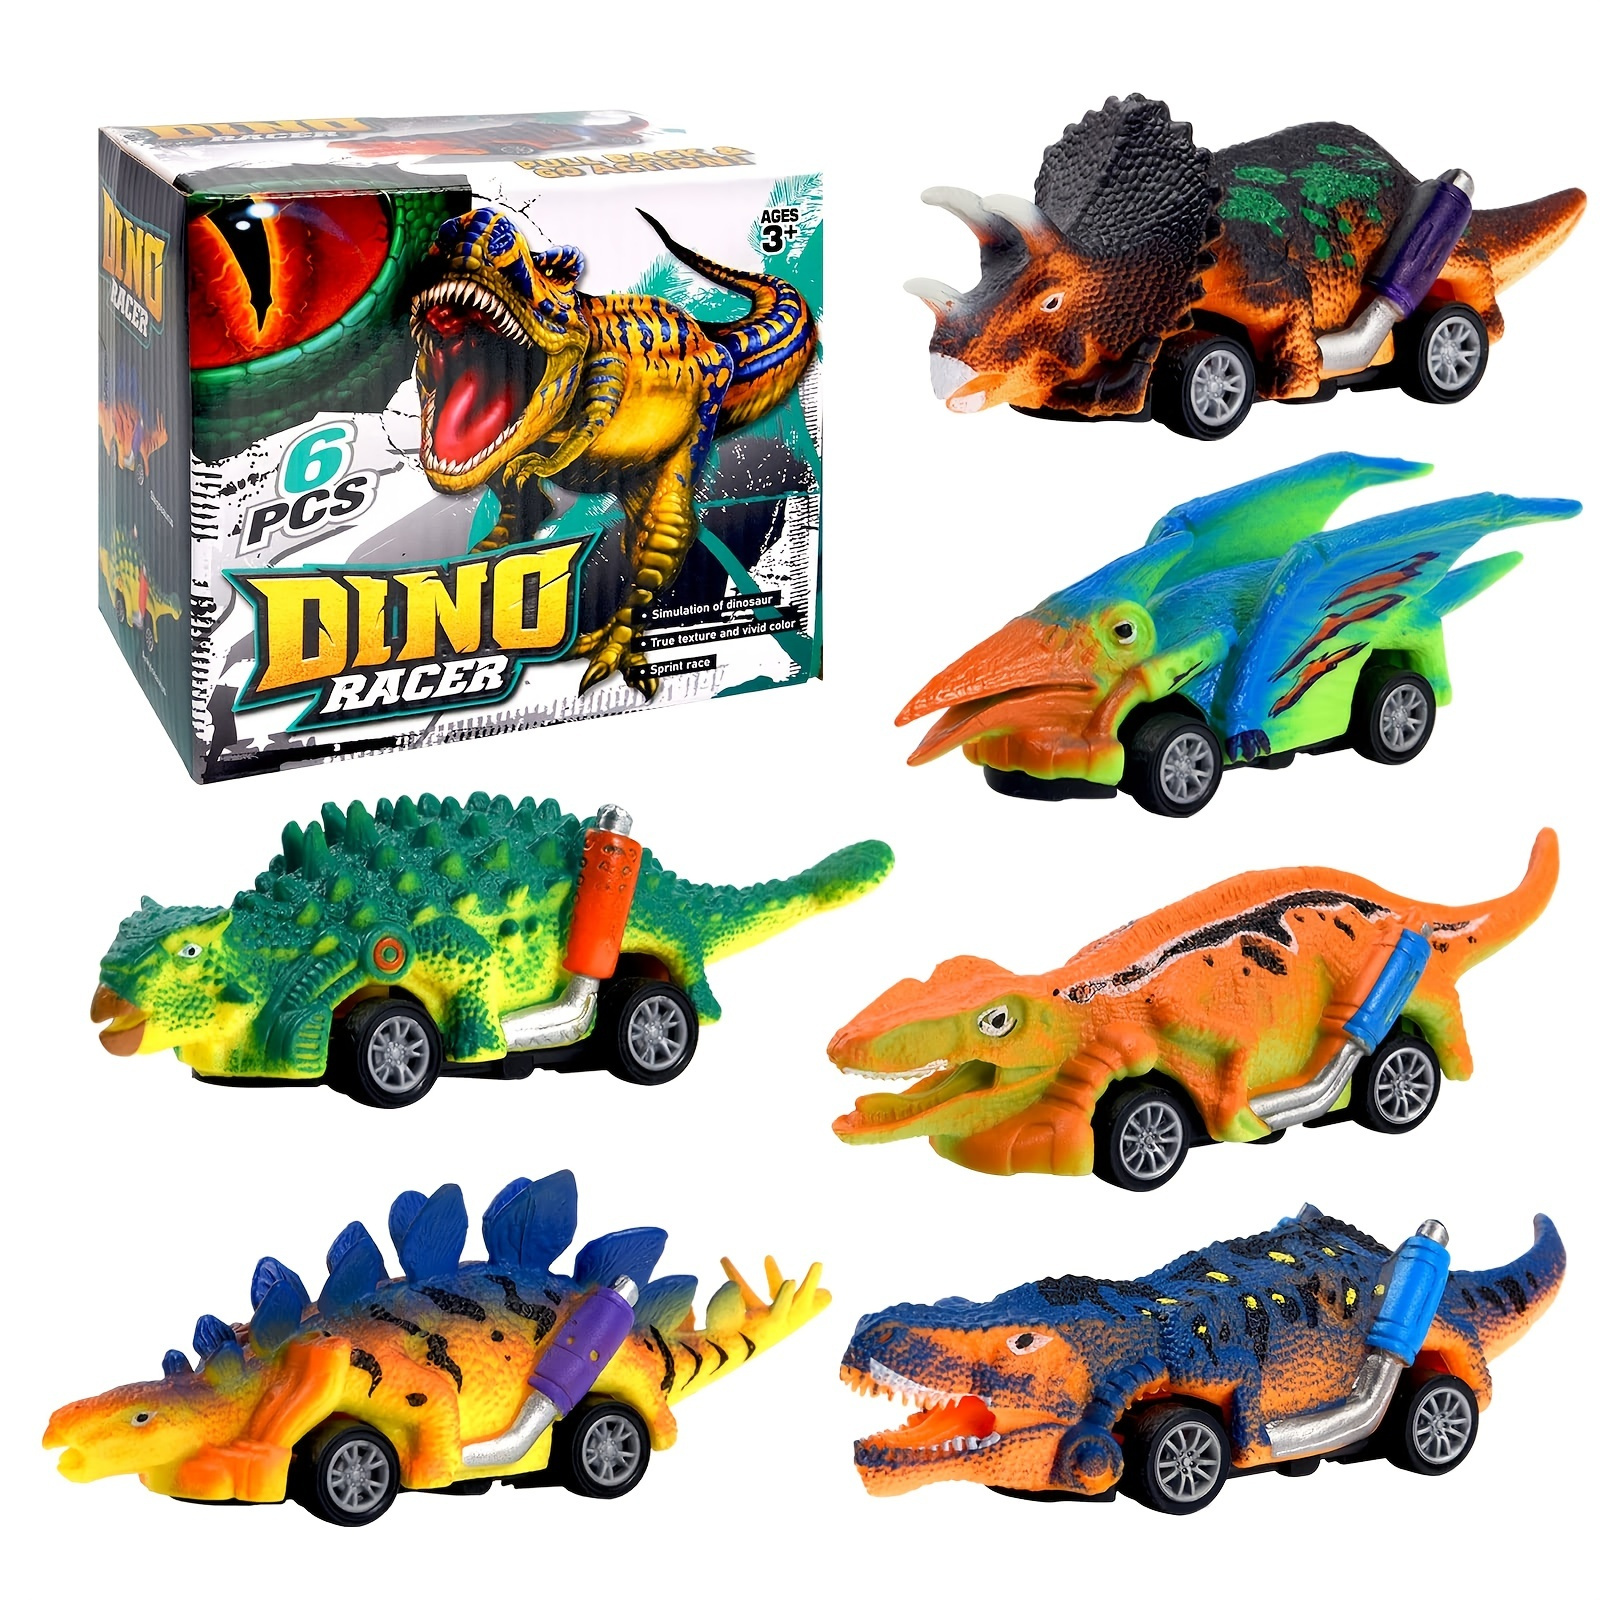 

Dinosaur Toys For 3 Year Old Boys, 6 Pack Mini Pull Cars With T-rex For Boys Dinosaurs Toys For Boys Kids Birthday Christmas Ideal Gifts For Toddlers, Christmas, Halloween, Thanksgiving Day Gift